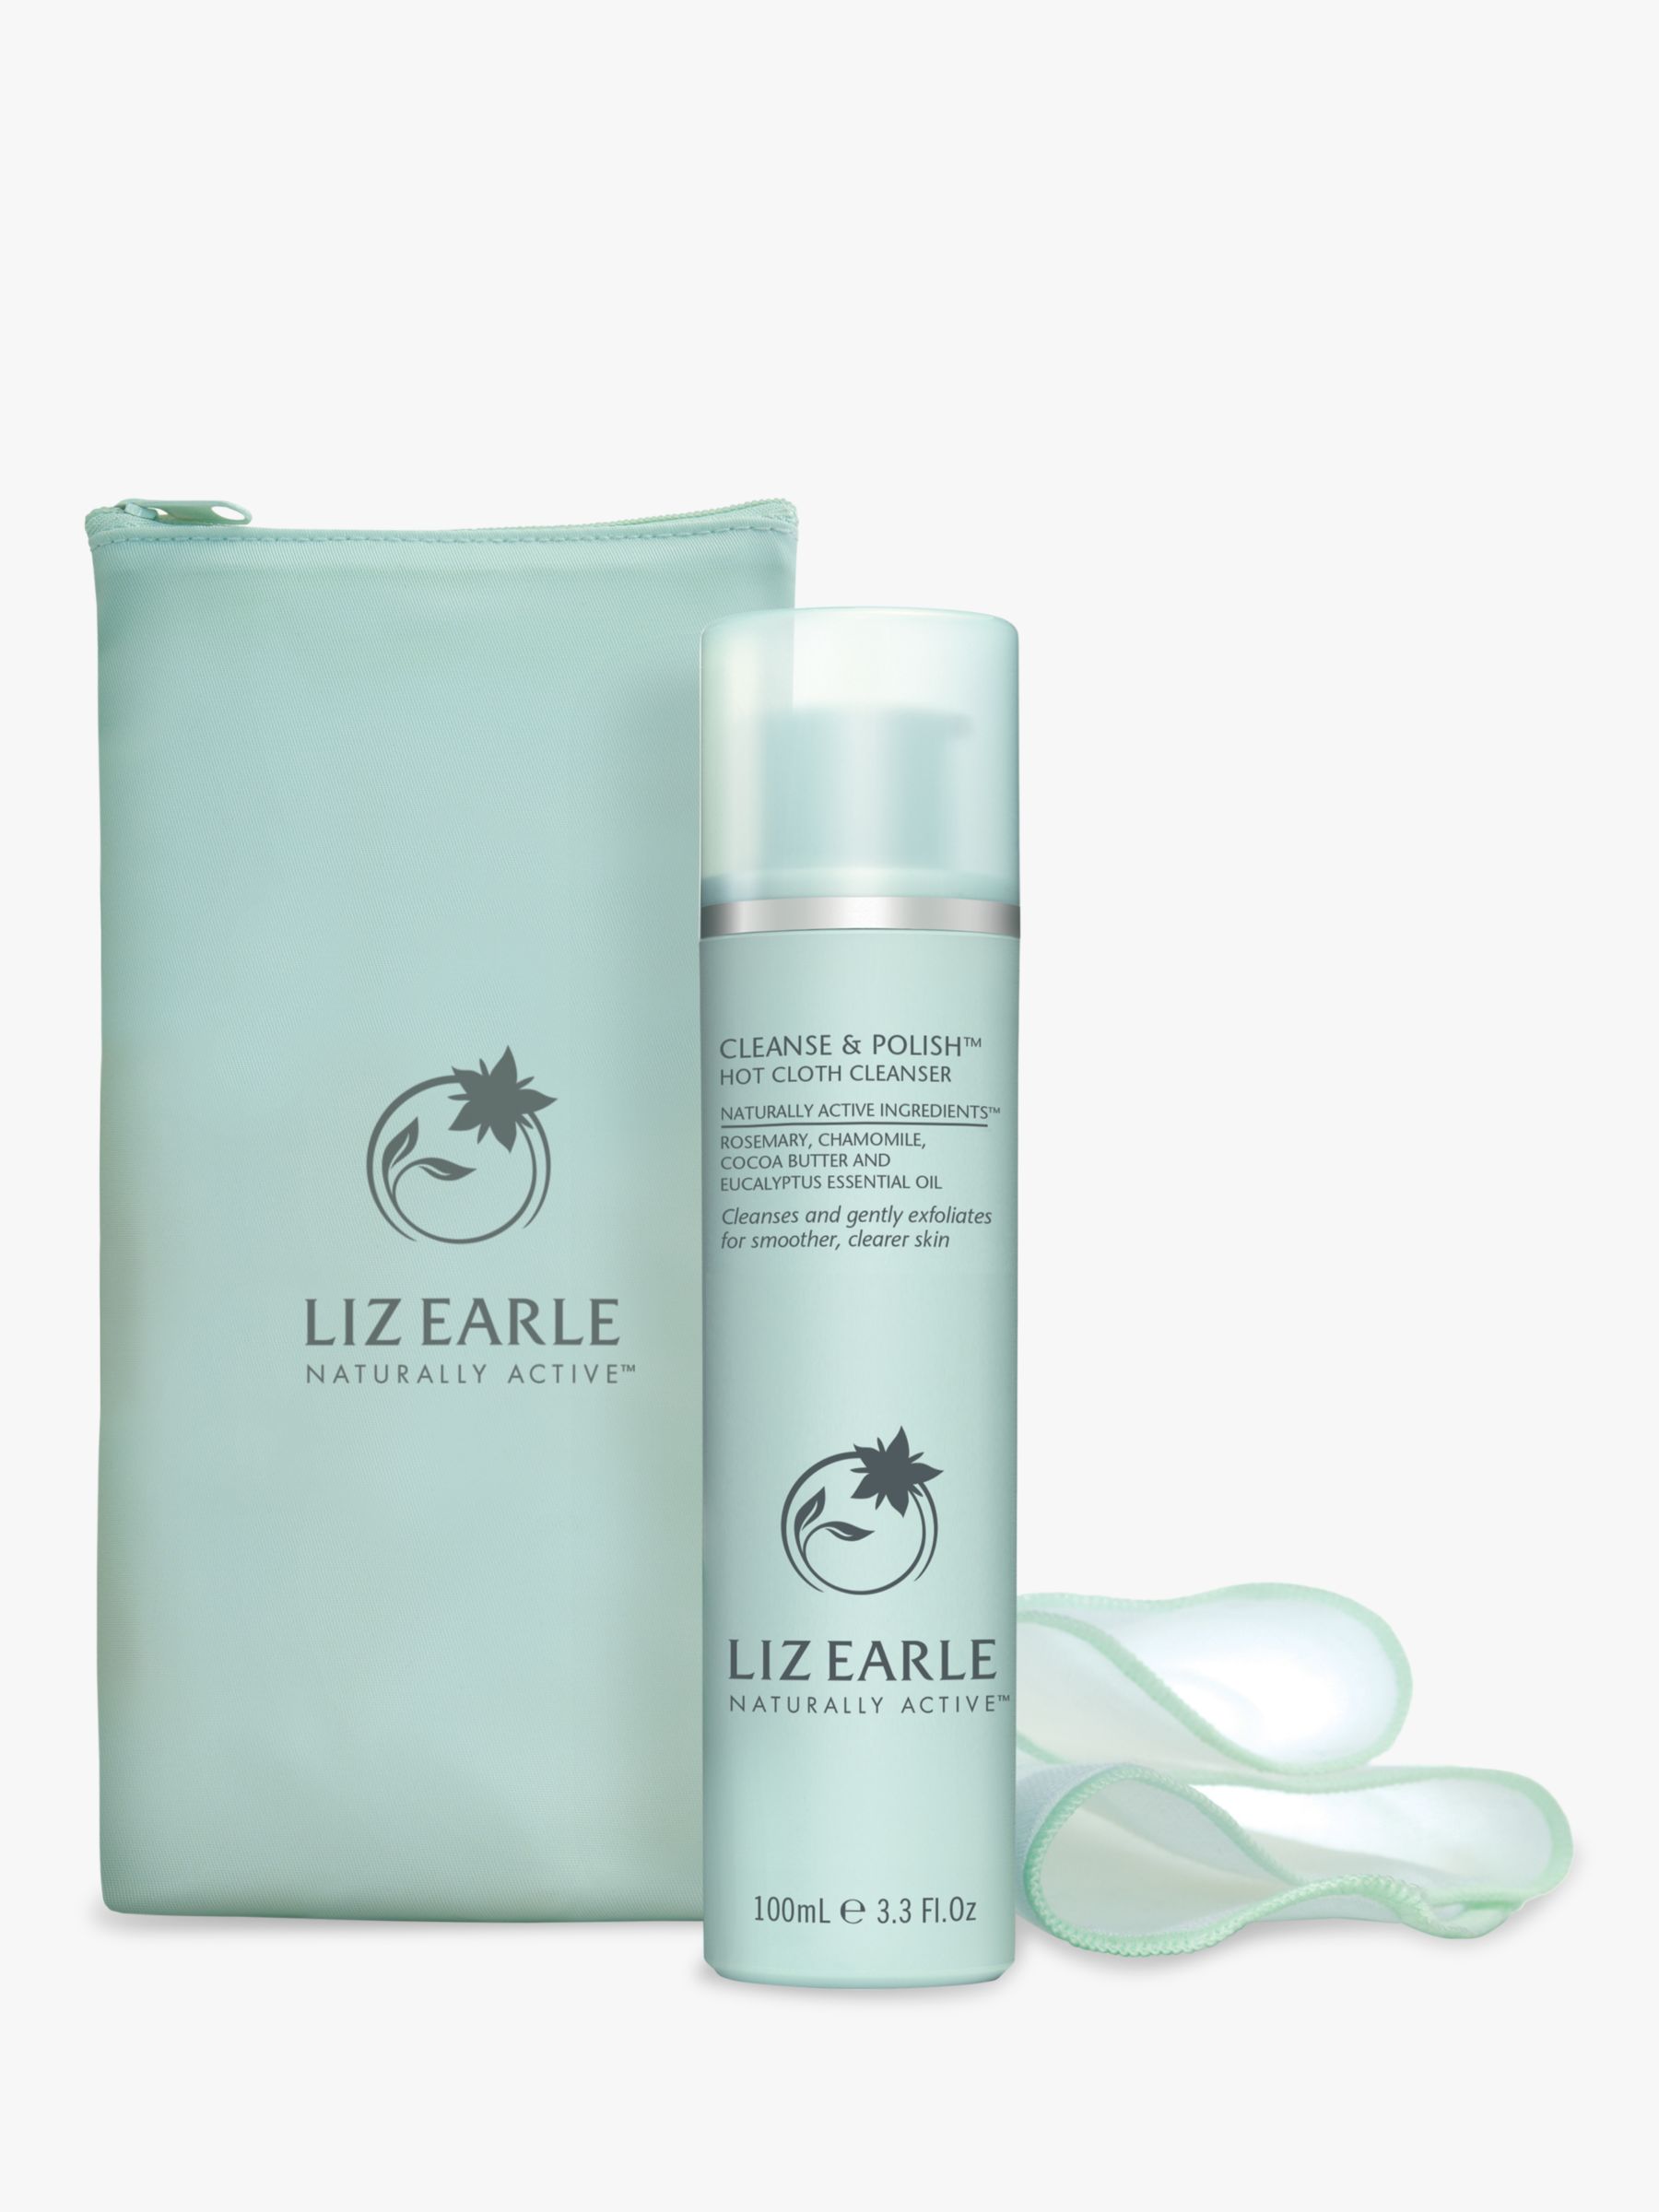 Liz Earle Cleanse And Polish™ Hot Cloth Cleanser 100ml With 2 Muslin